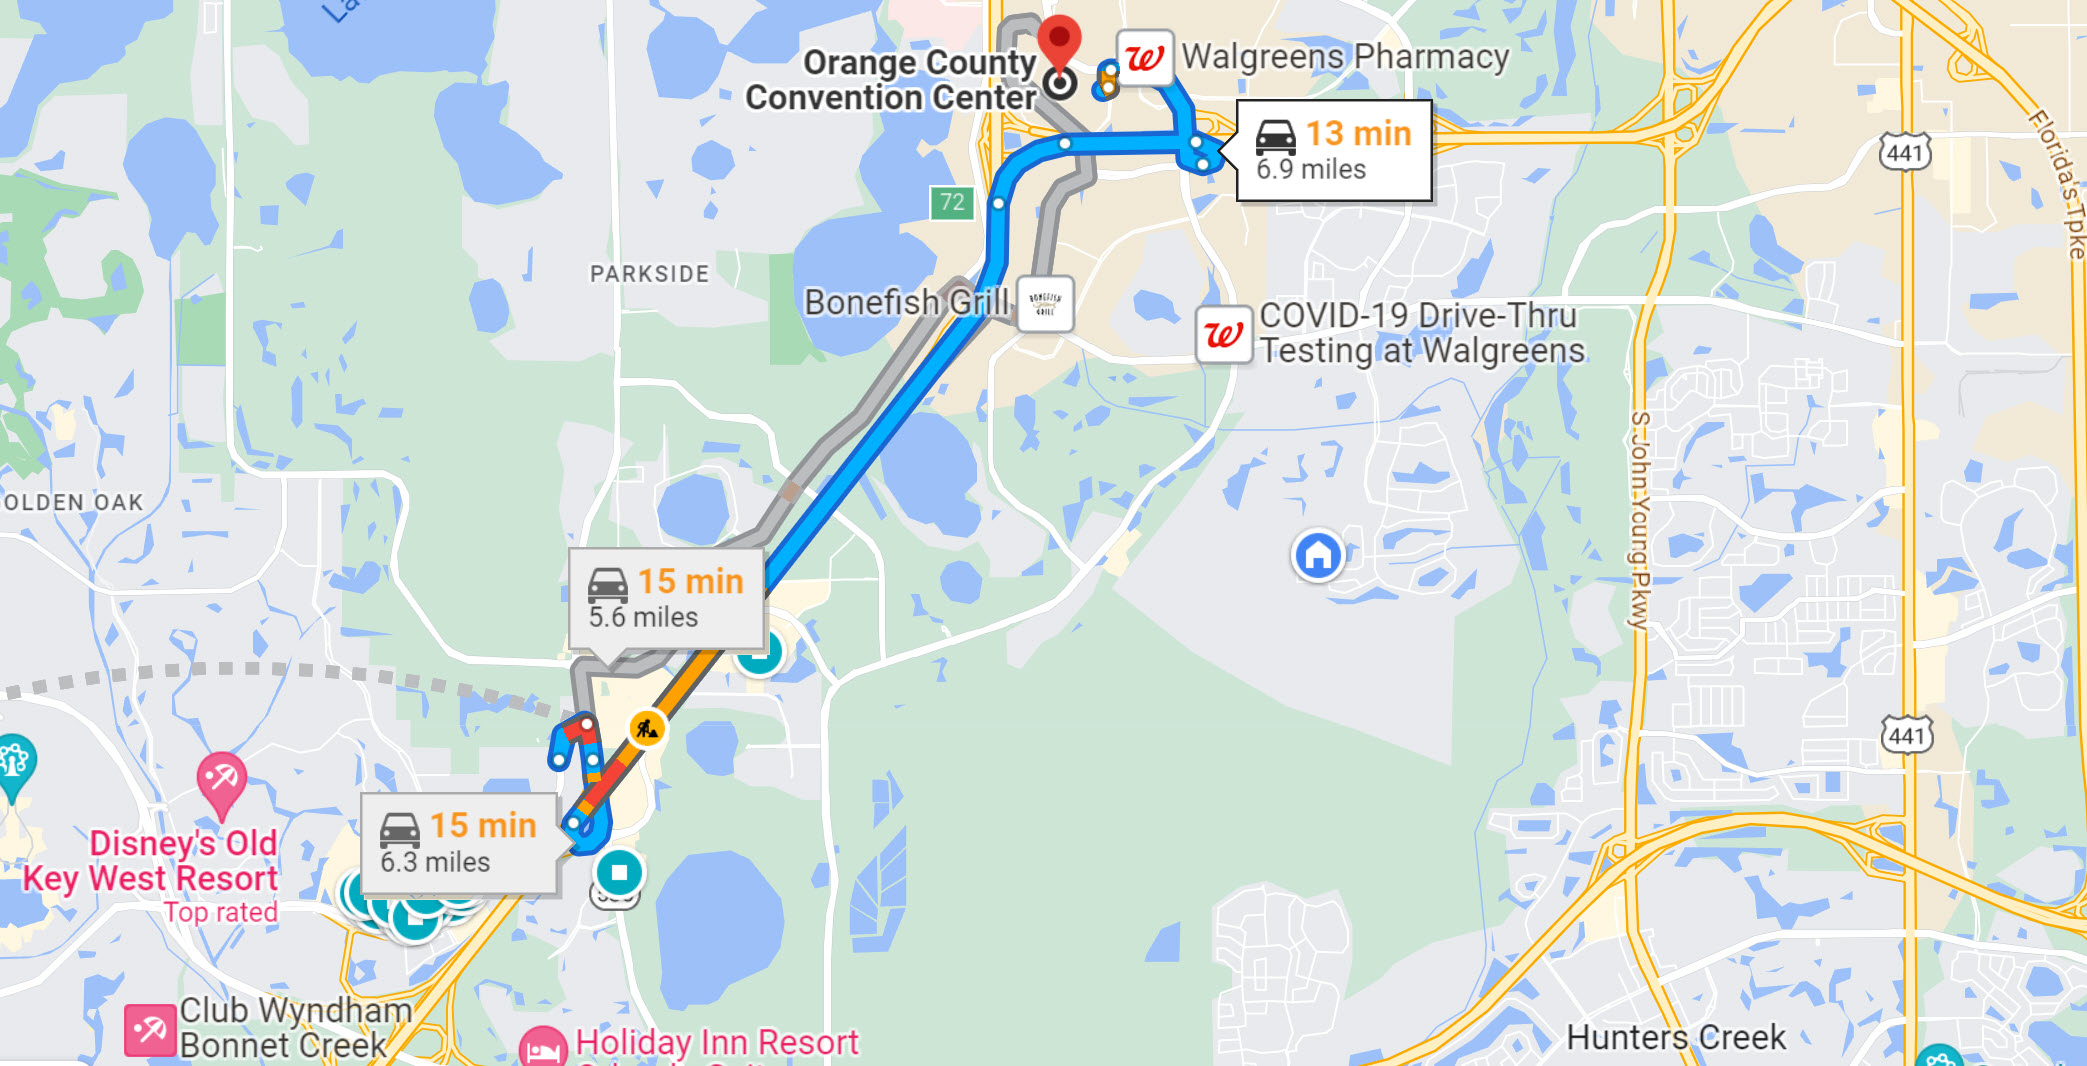 How Far is the Orange County Convention Center from Disney